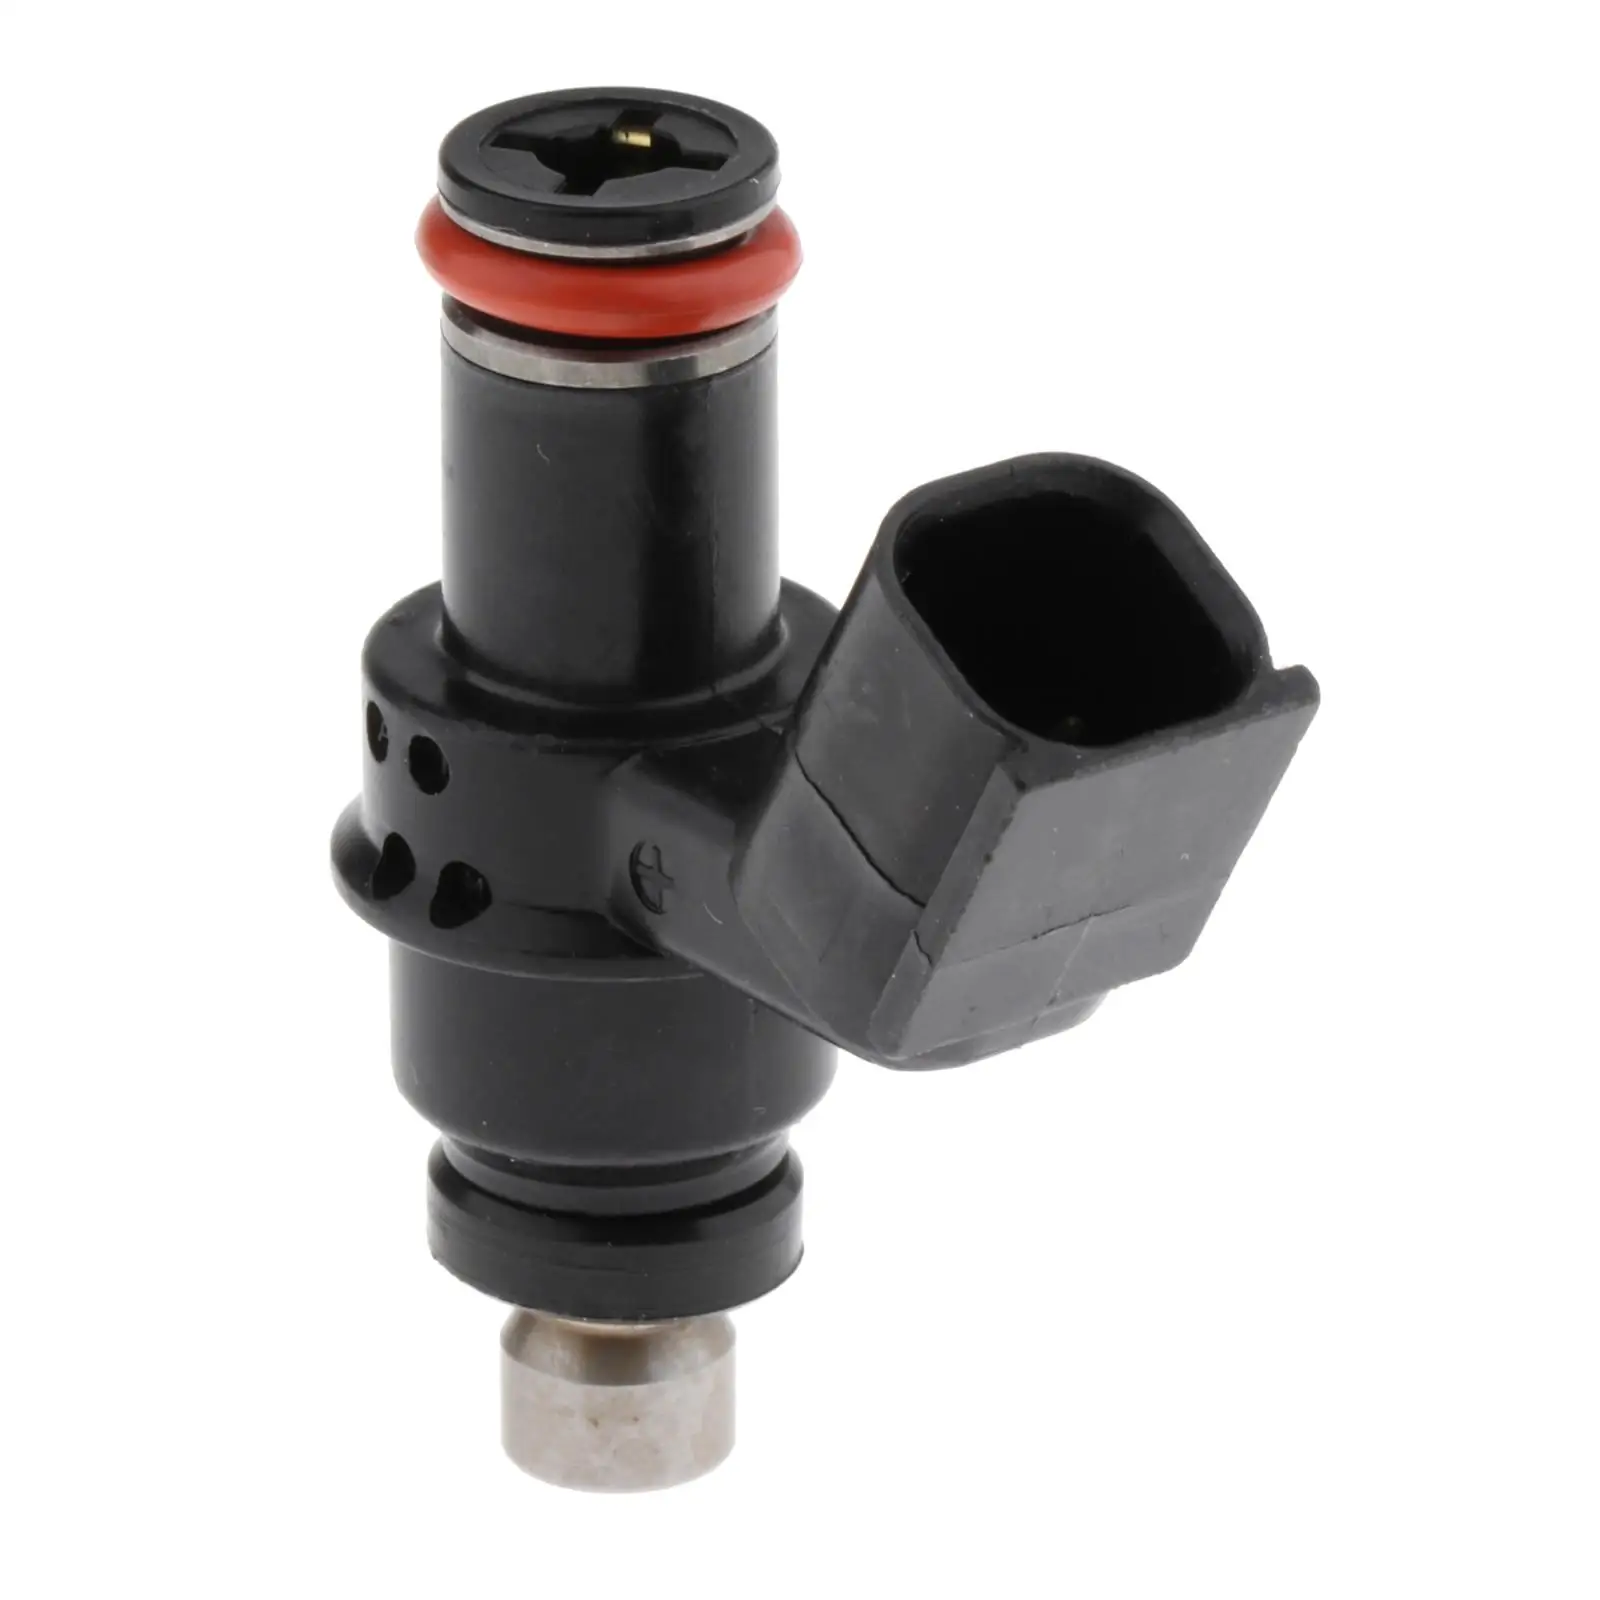 High quality 1PCS Professional Fuel Injector For Honda Outboard BF50D BF40D